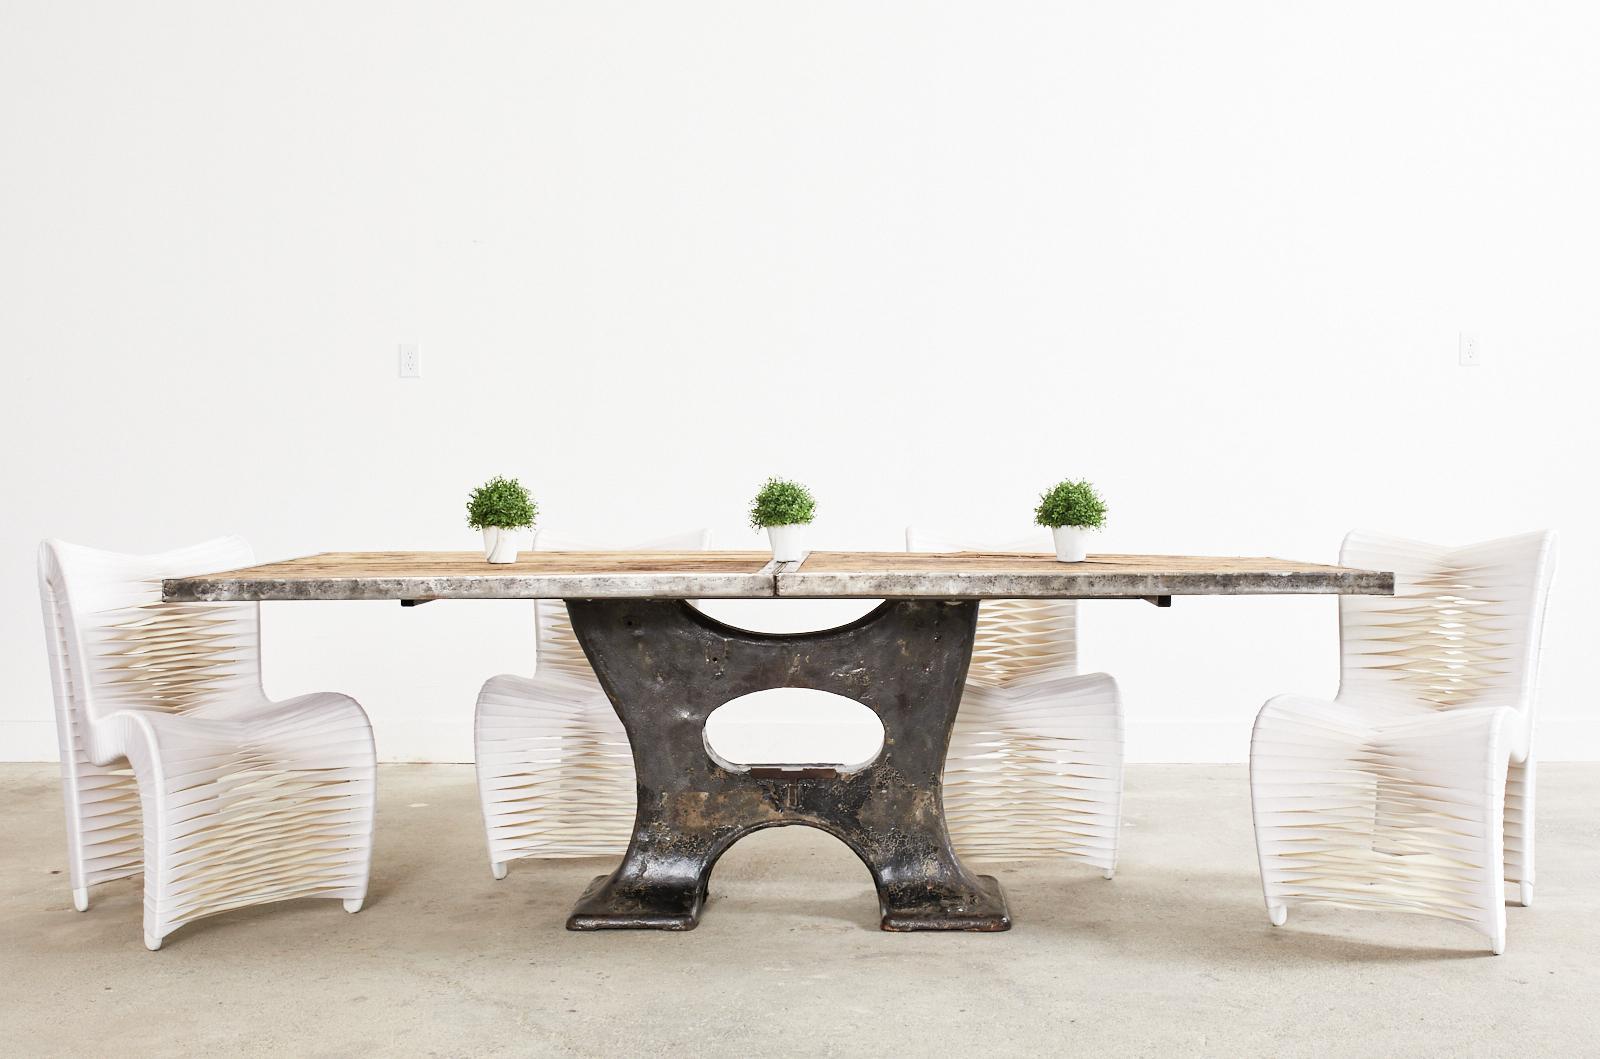 Incredible 20th century industrial style repurposed dining table from Prague. Crafted from an iron maritime Mooring Bollard or docking anchor. The nautical themed table was constructed by Strojtex in Dvur Kralove, Czech Republic and was purported to